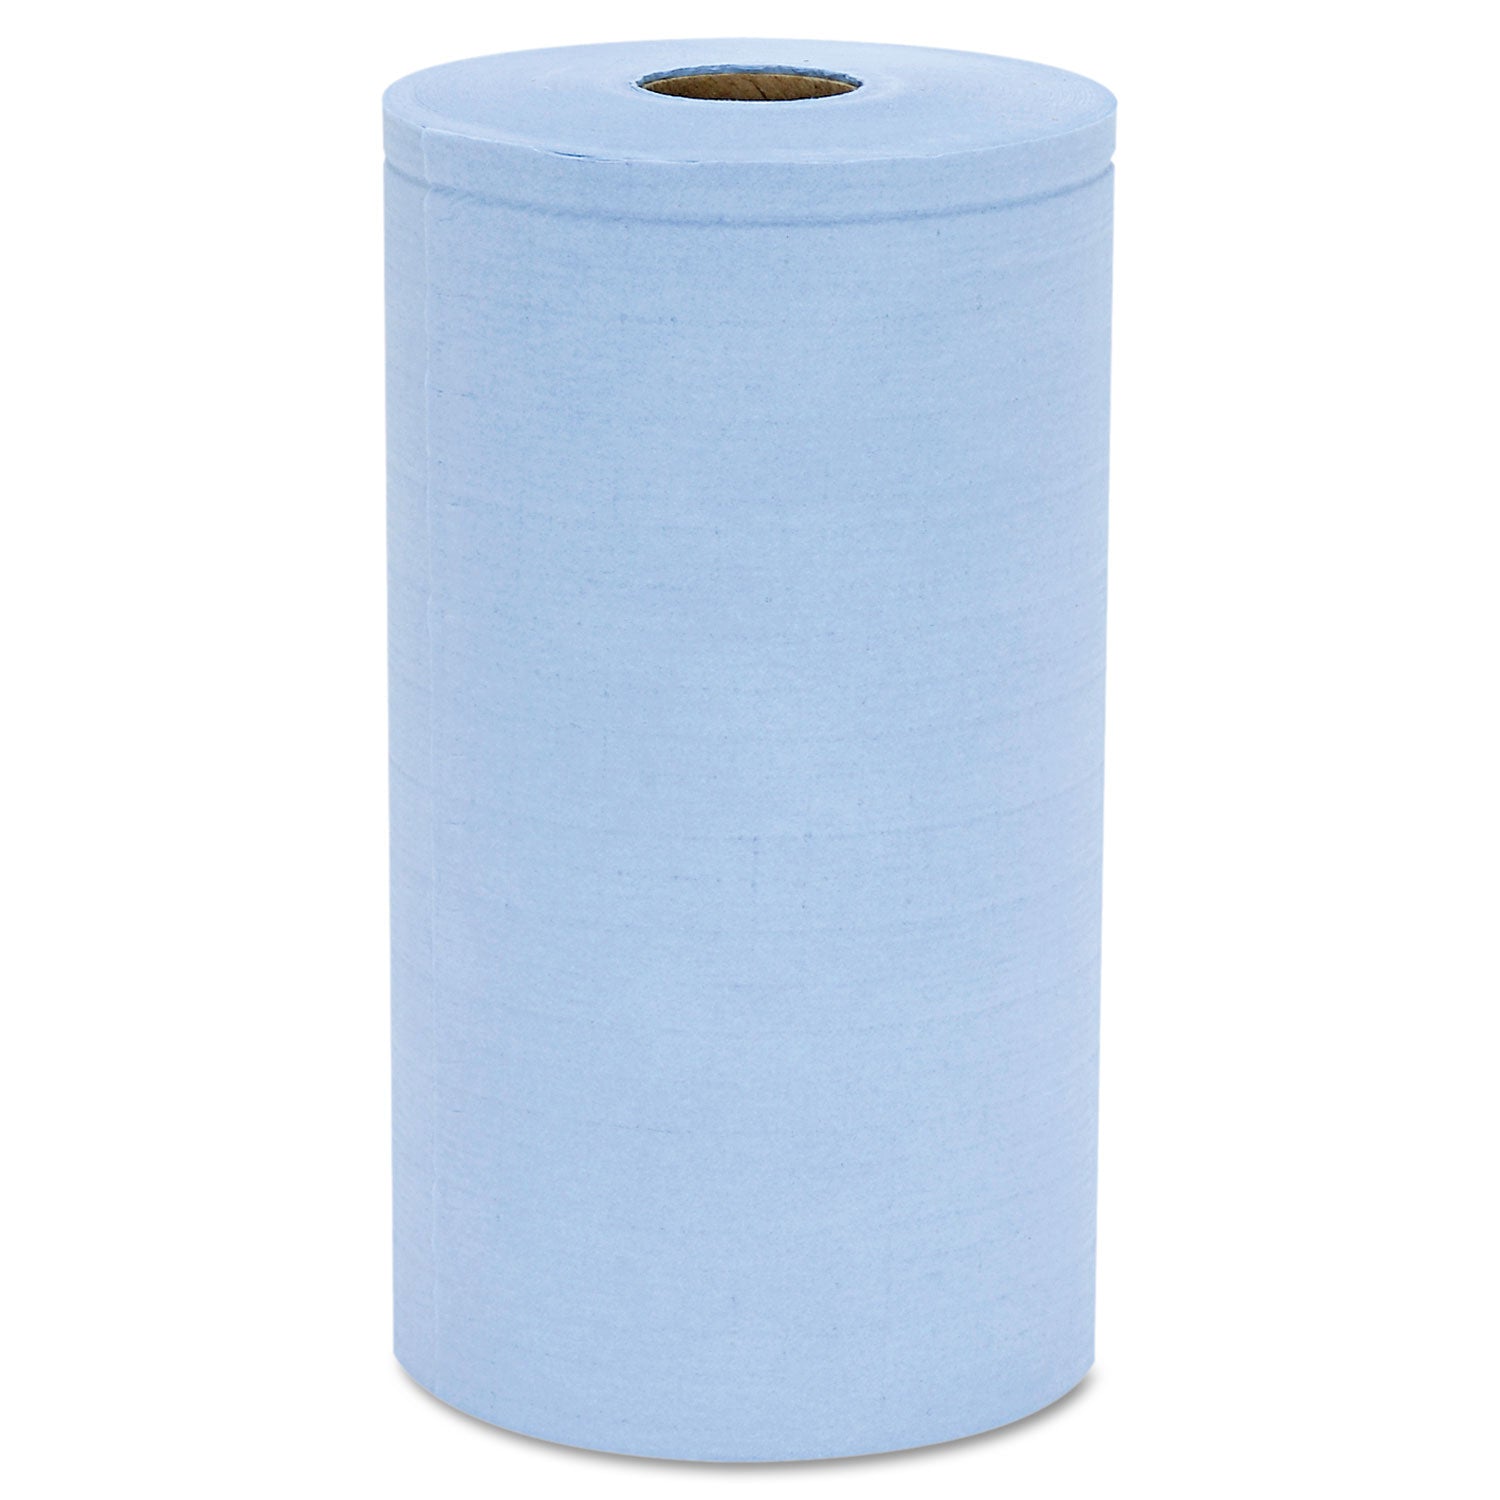 prism-scrim-reinforced-wipers-4-ply-975-x-275-ft-unscented-blue-6-rolls-carton_hosc2375bh - 1